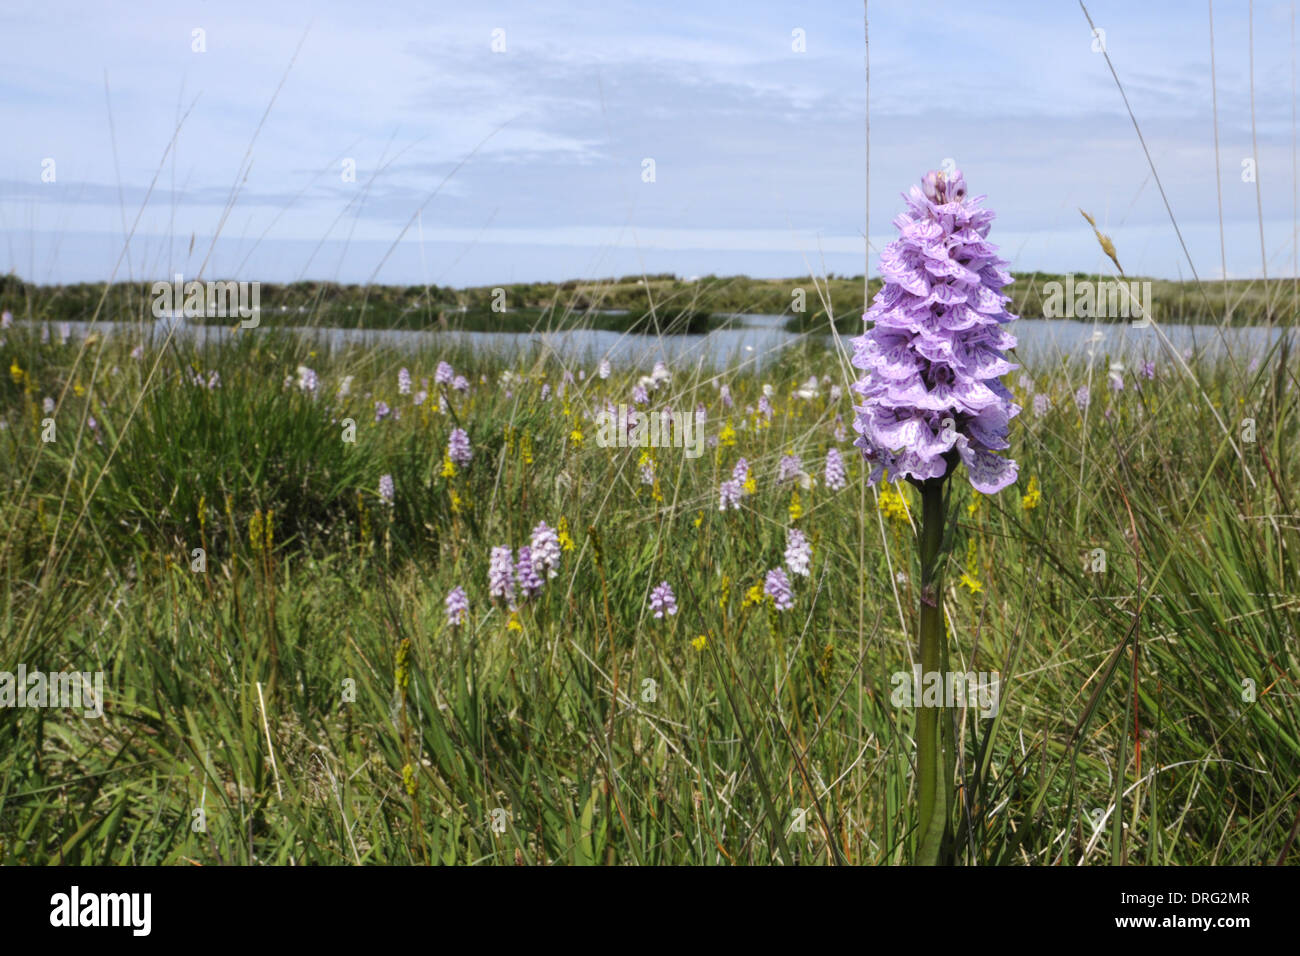 Heide Spotted-Orchidee - Dactylorhiza Maculata (Orchidaceae) Stockfoto